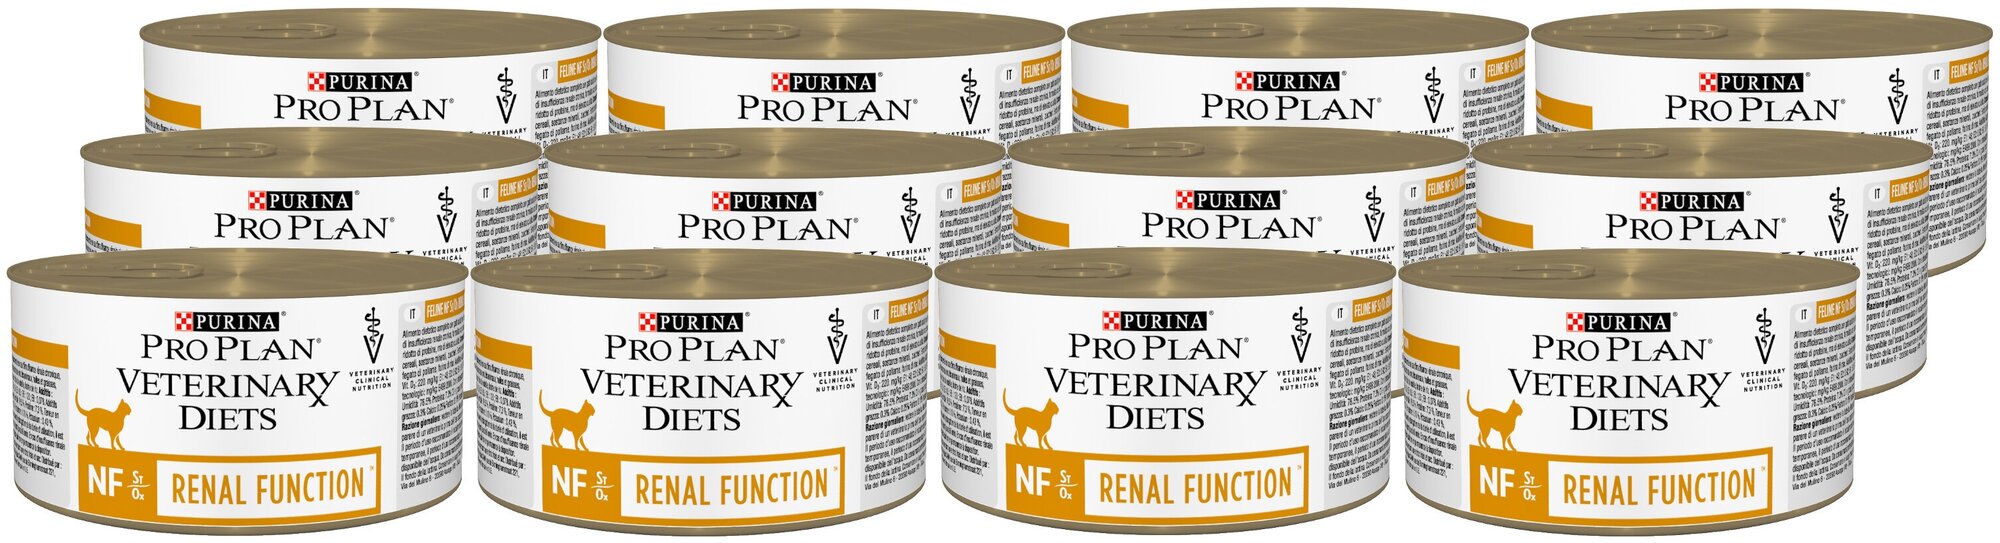 Pro plan veterinary diets renal function gatos